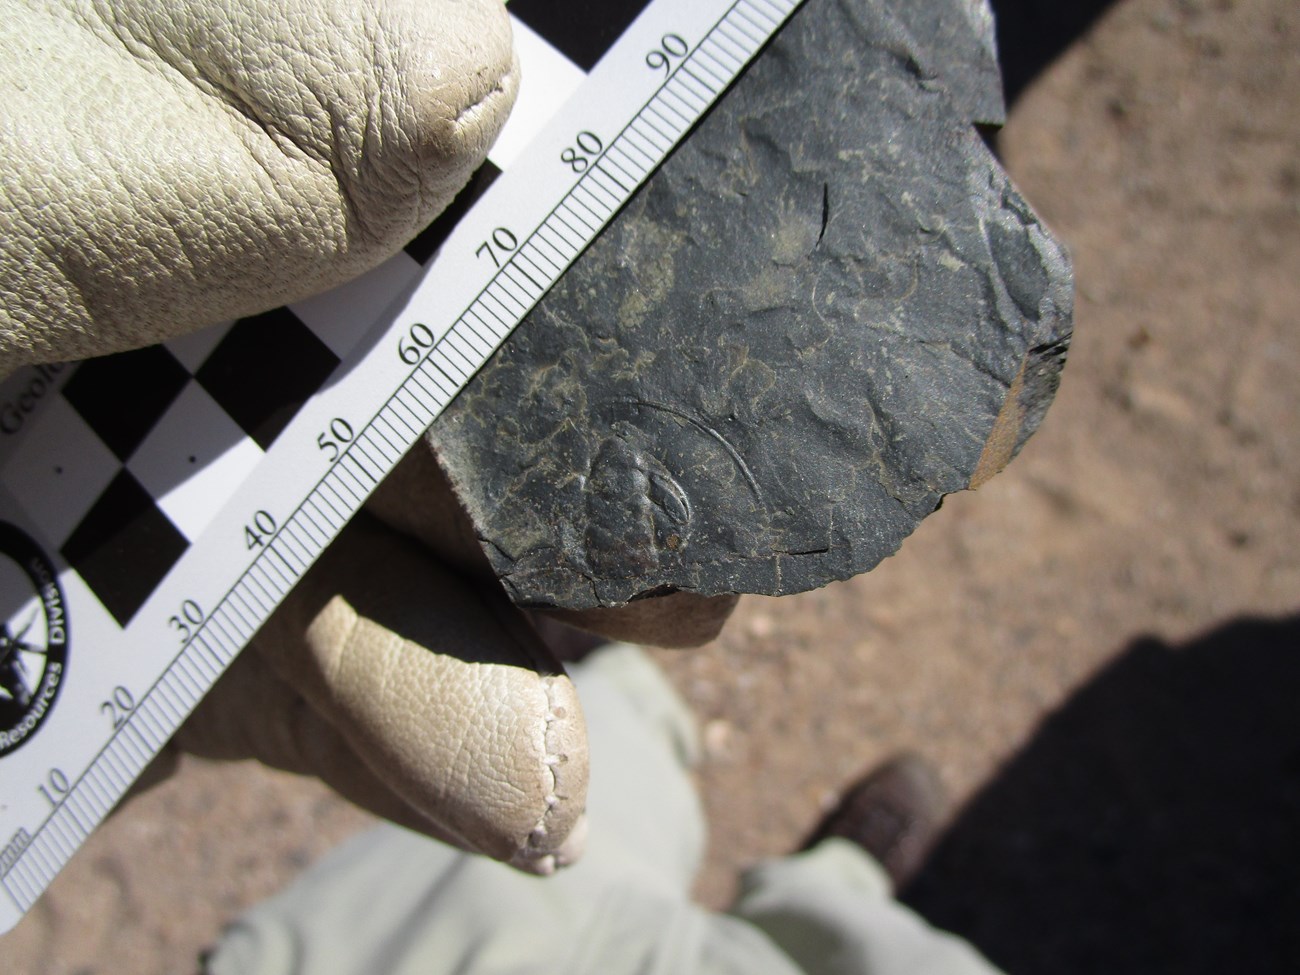 Photo of person's gloved hand holding a fossil and ruler.